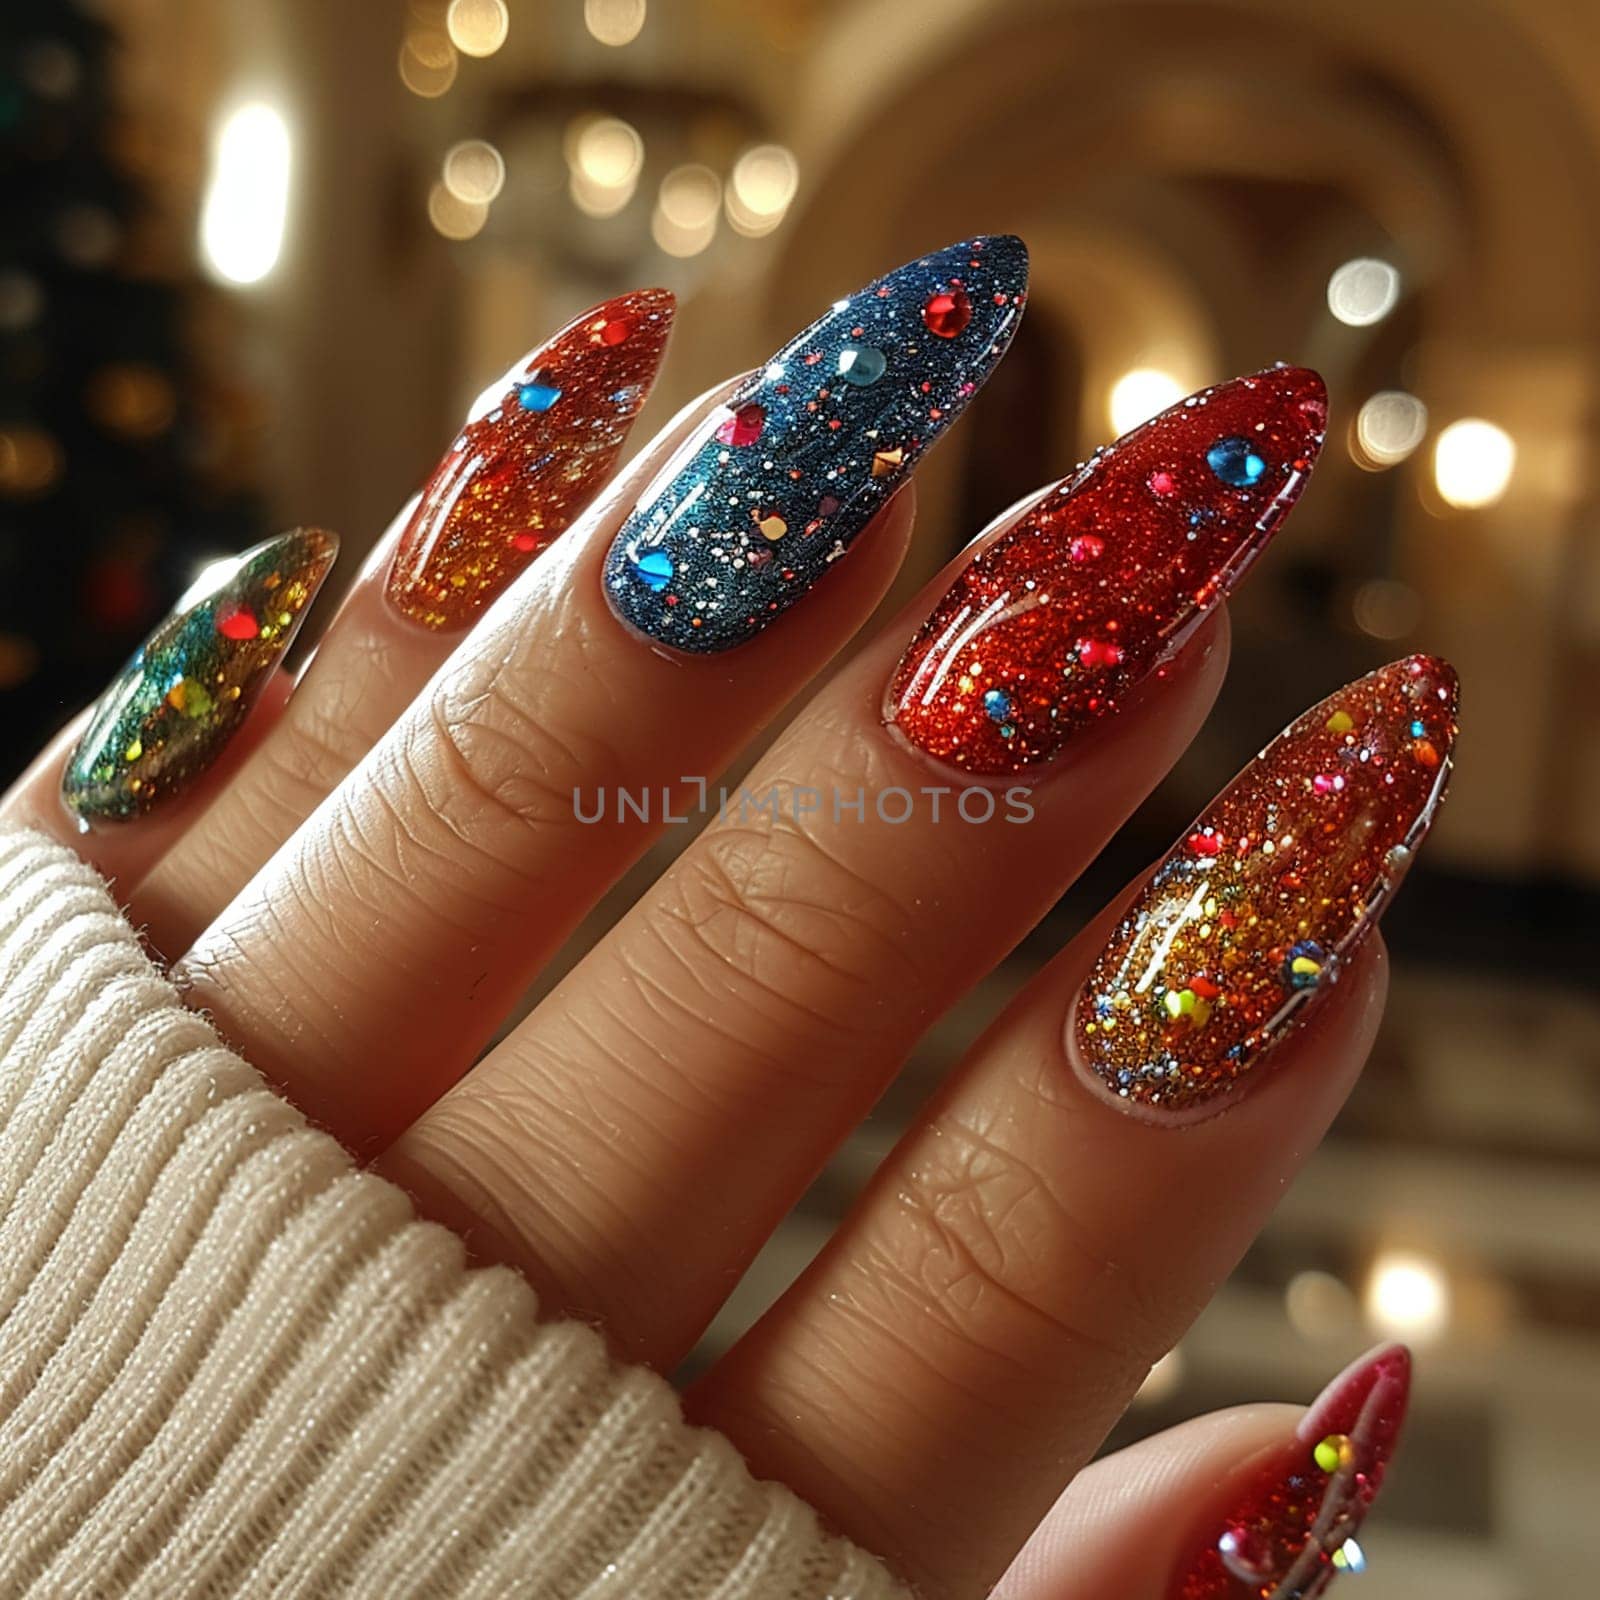 Close-up of hand with glittery nail art, showcasing creative beauty and fashion.